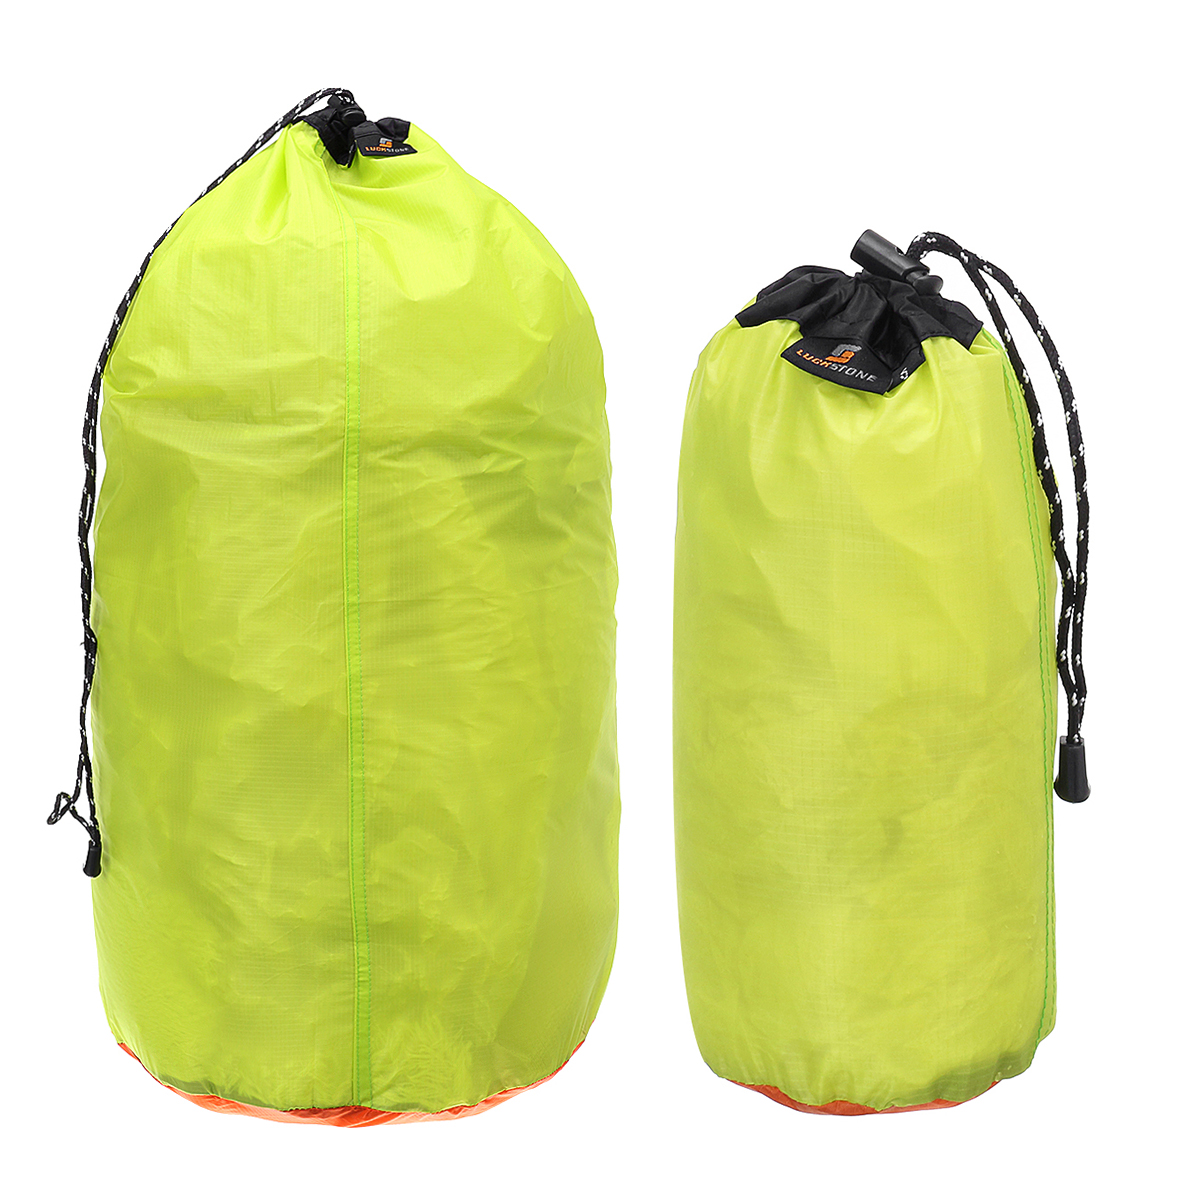 Portable-Drawstring-Storage-Bag-Outdoor-Waterproof-Traveling-Clothes-Shoes-Bag-SMLXL2XL-1555374-3